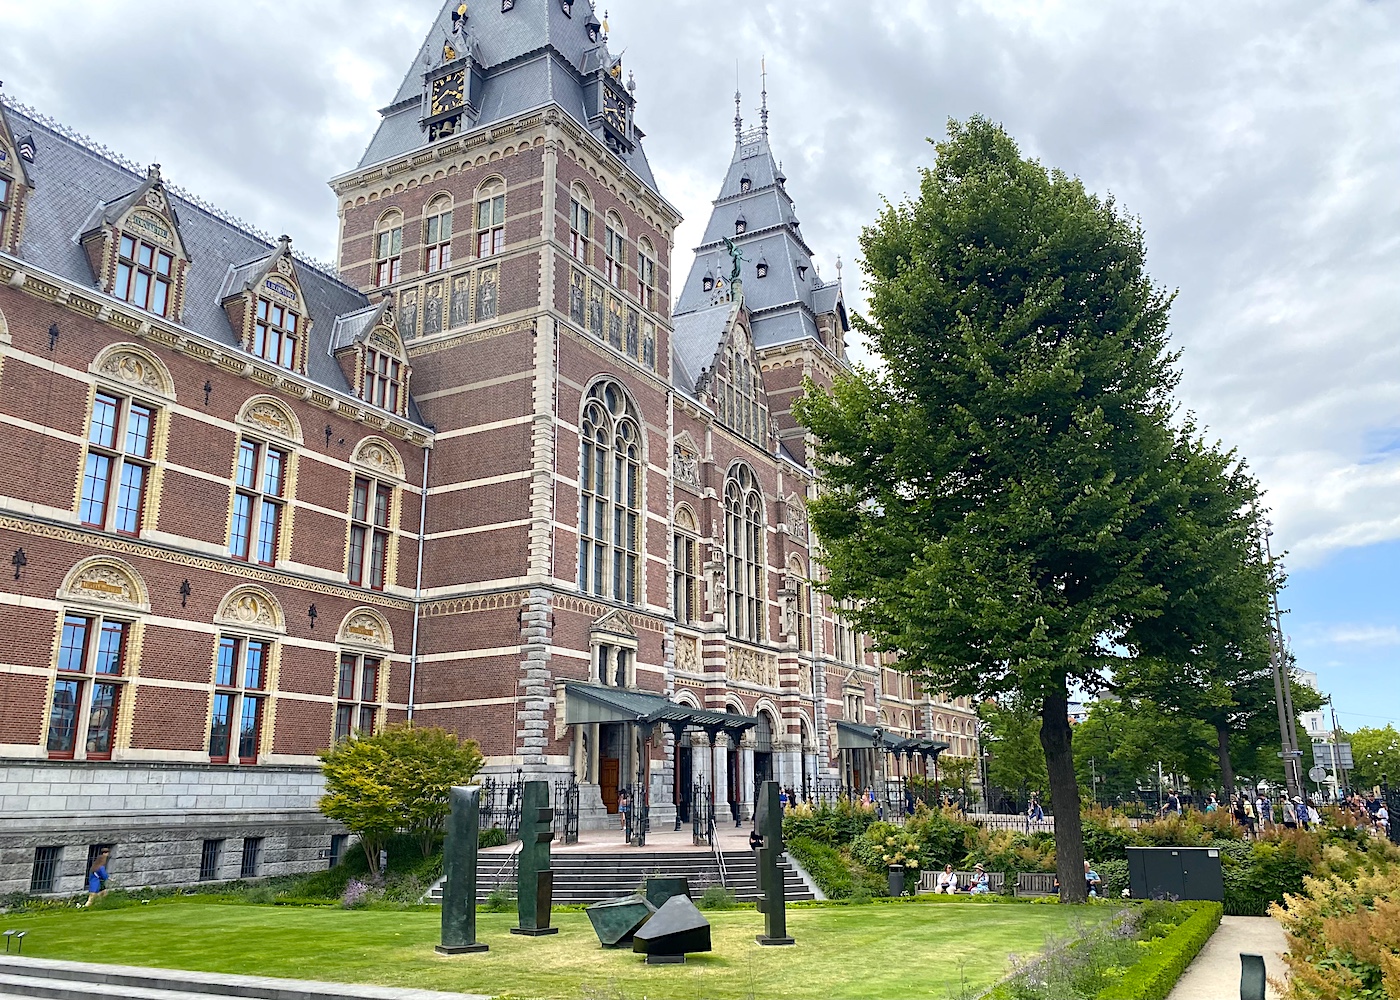 Rijksmuseum is the national art & history museum (adults €20)